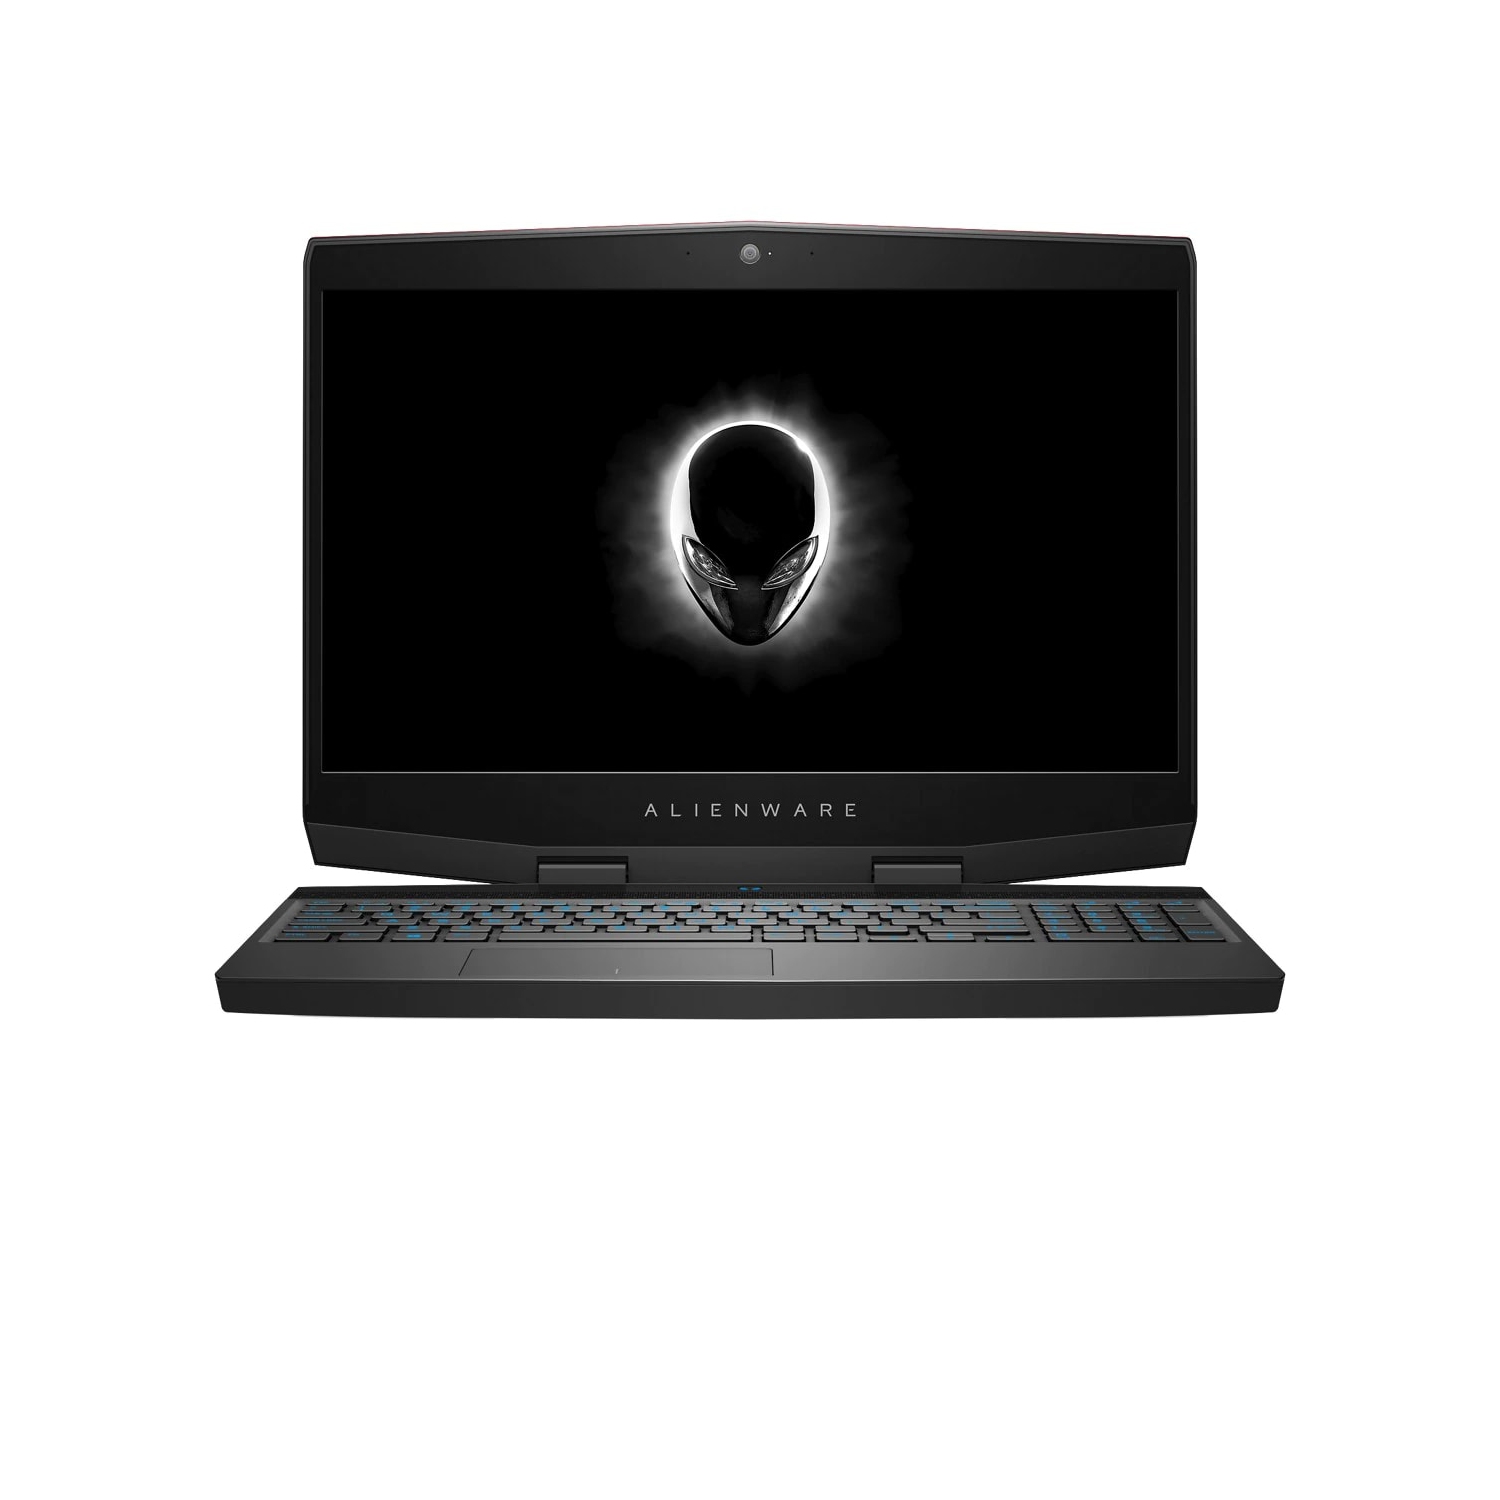 Refurbished (Excellent) – Dell Alienware m15 Gaming Laptop (2018) | 15.6" FHD | Core i7 - 512GB SSD - 16GB RAM - RTX 2080 | 6 Cores @ 4.1 GHz - 8GB GDDR6